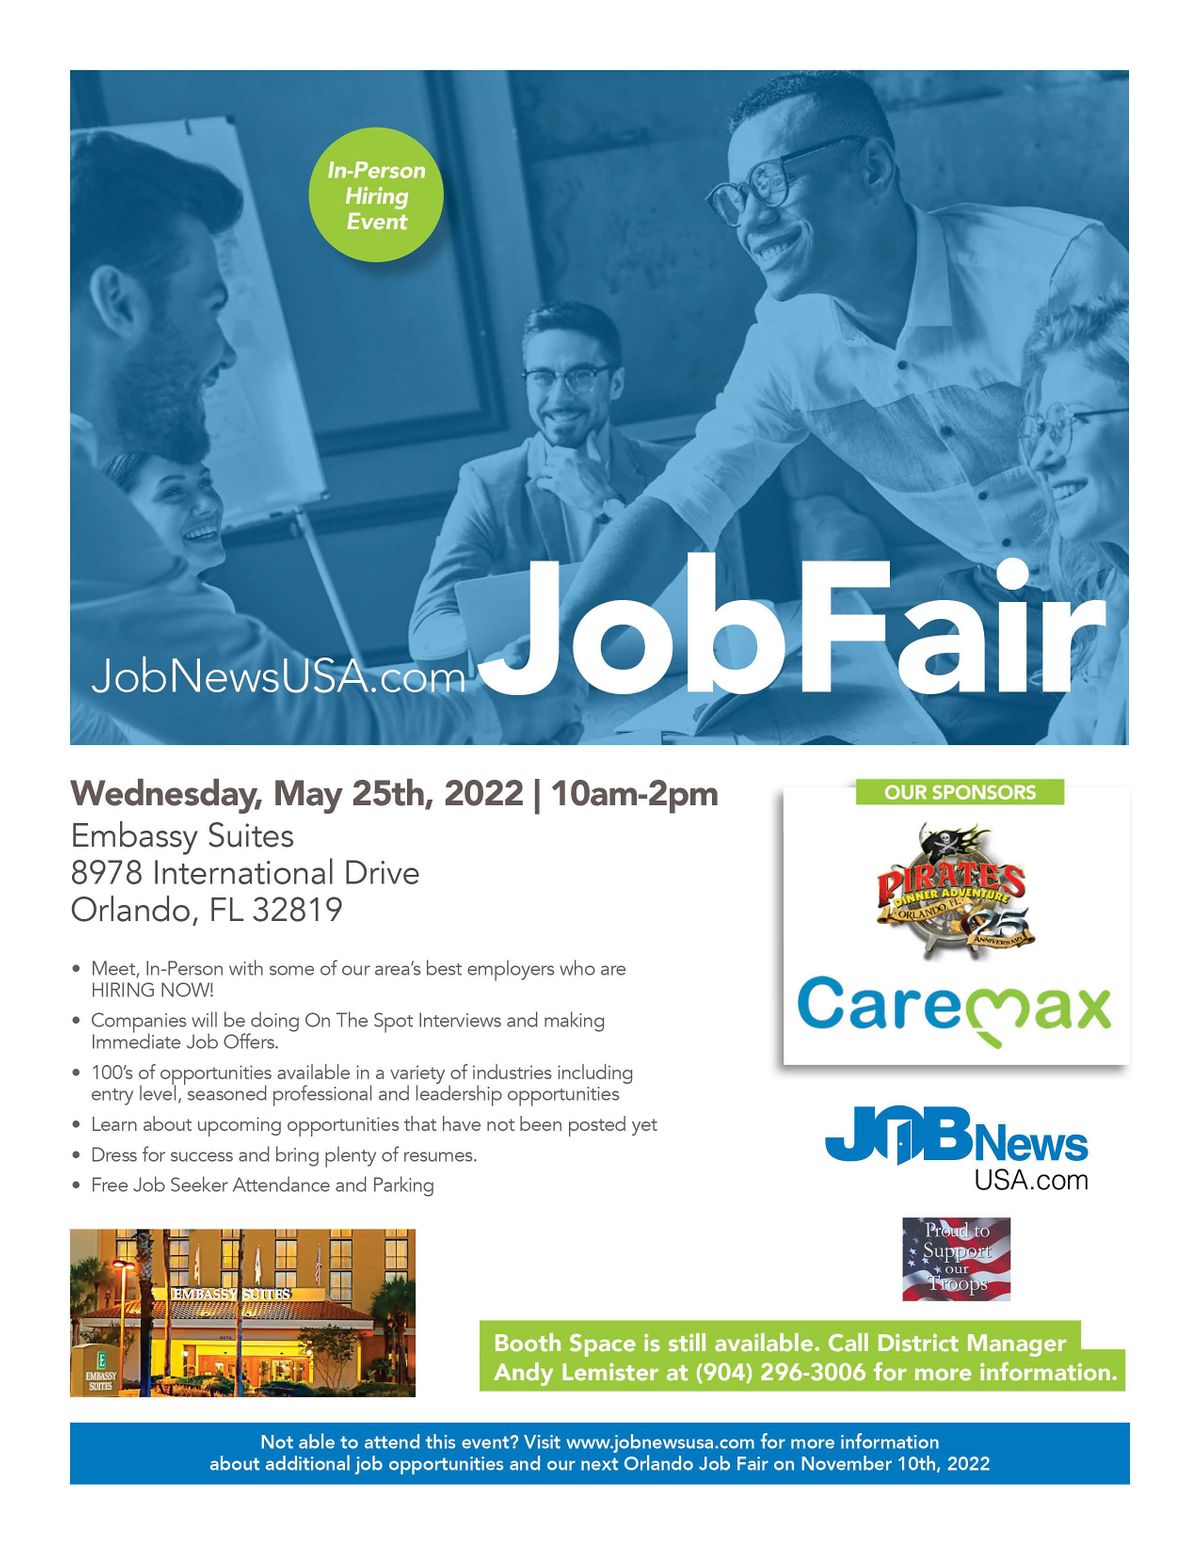 Orlando Job Fair OVER 750 JOBS Available on May 25th, Embassy Suites